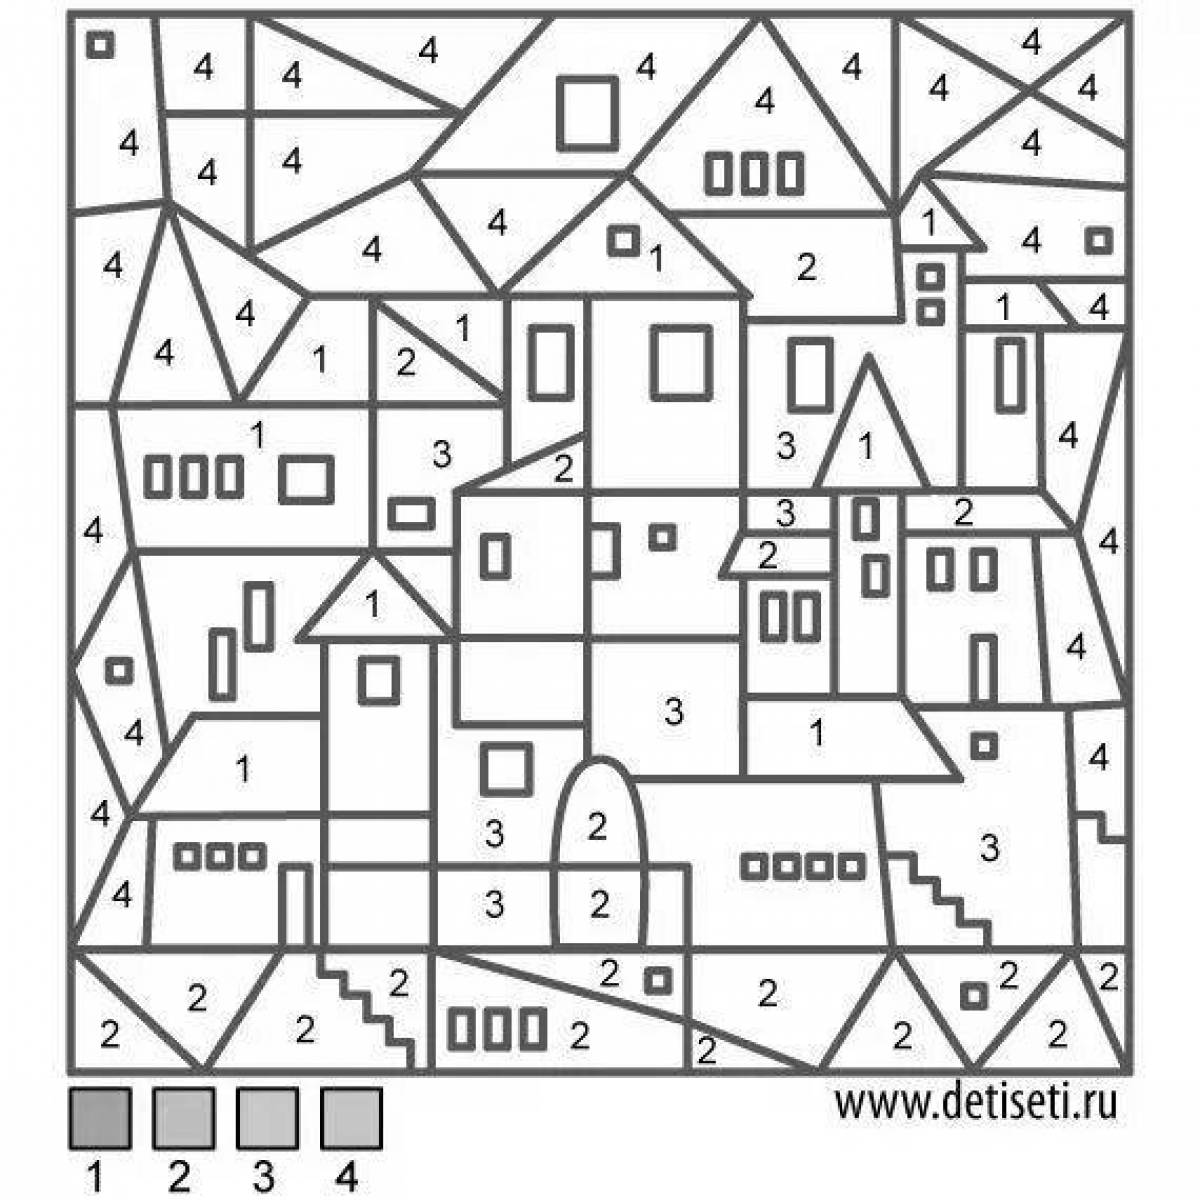 Coloring game by numbers and cells